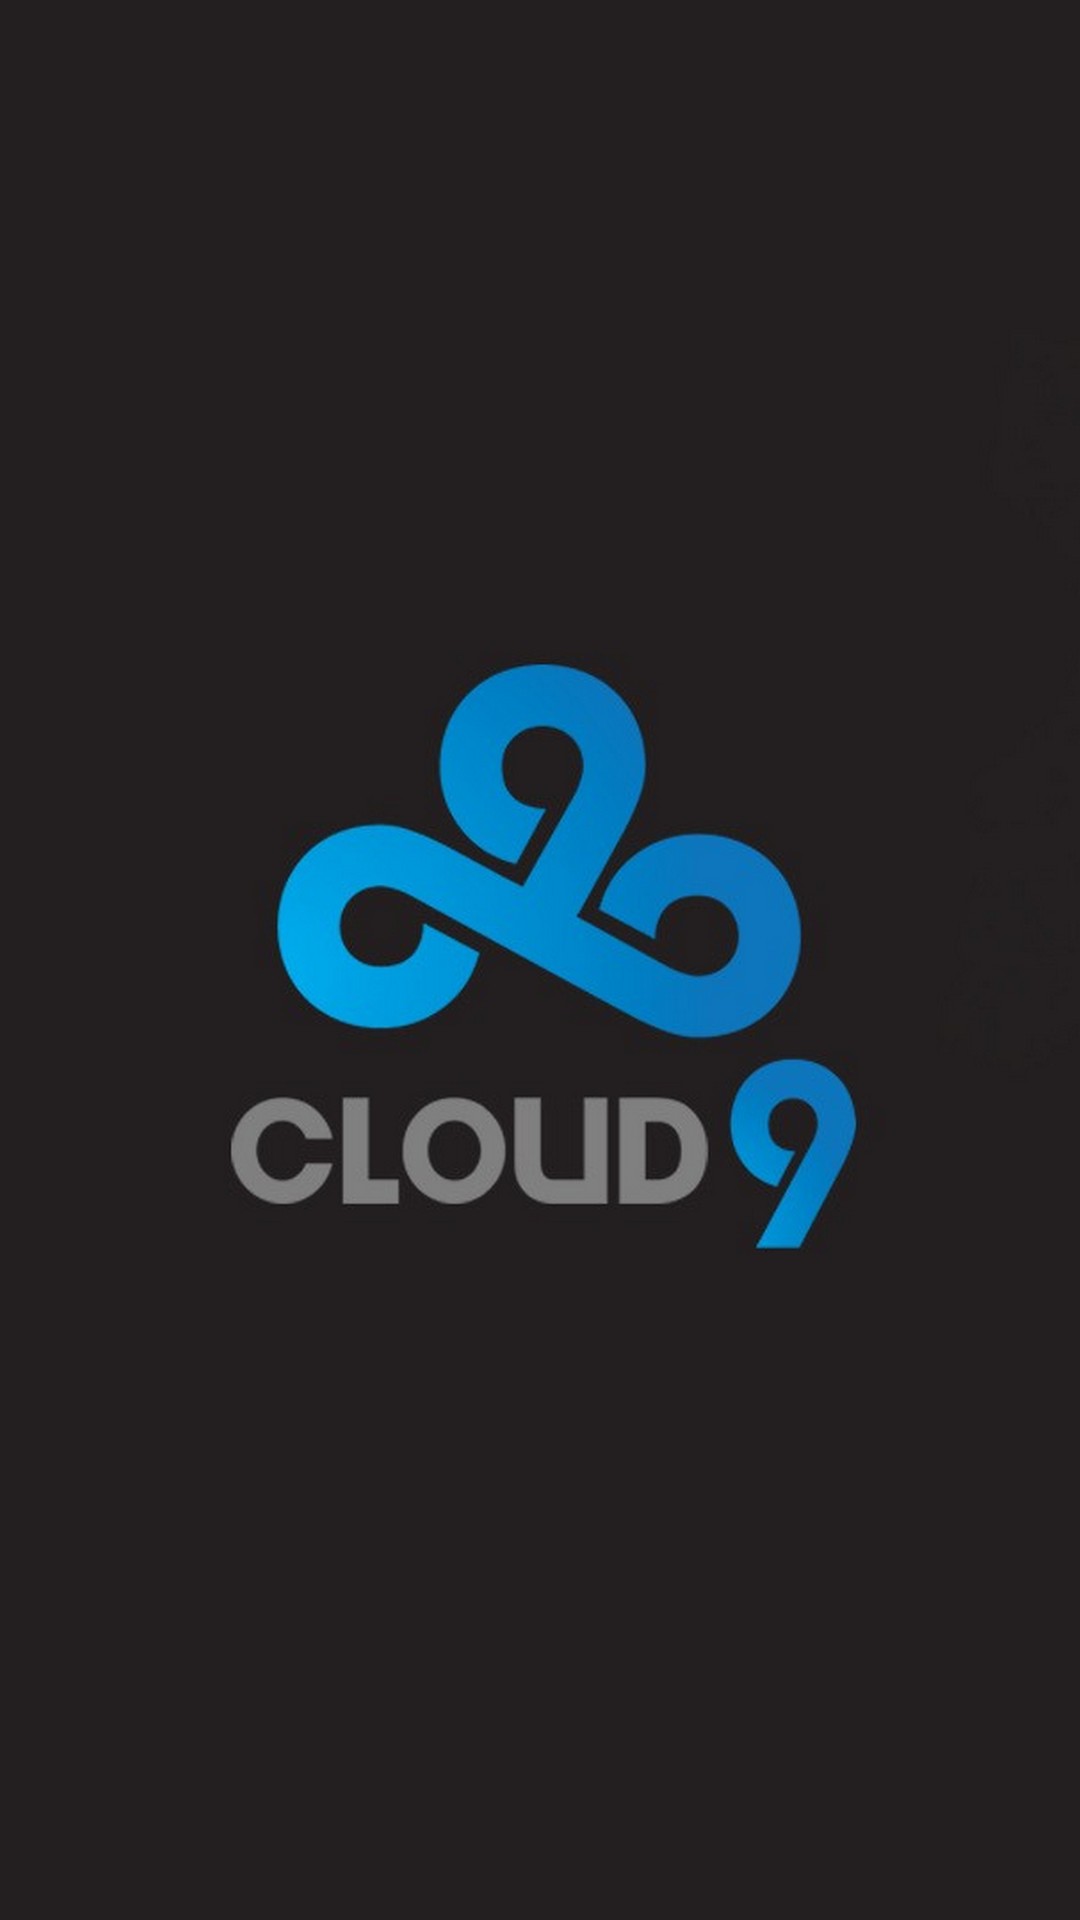 Cloud 9 Games Wallpaper For Android with HD resolution 1080x1920